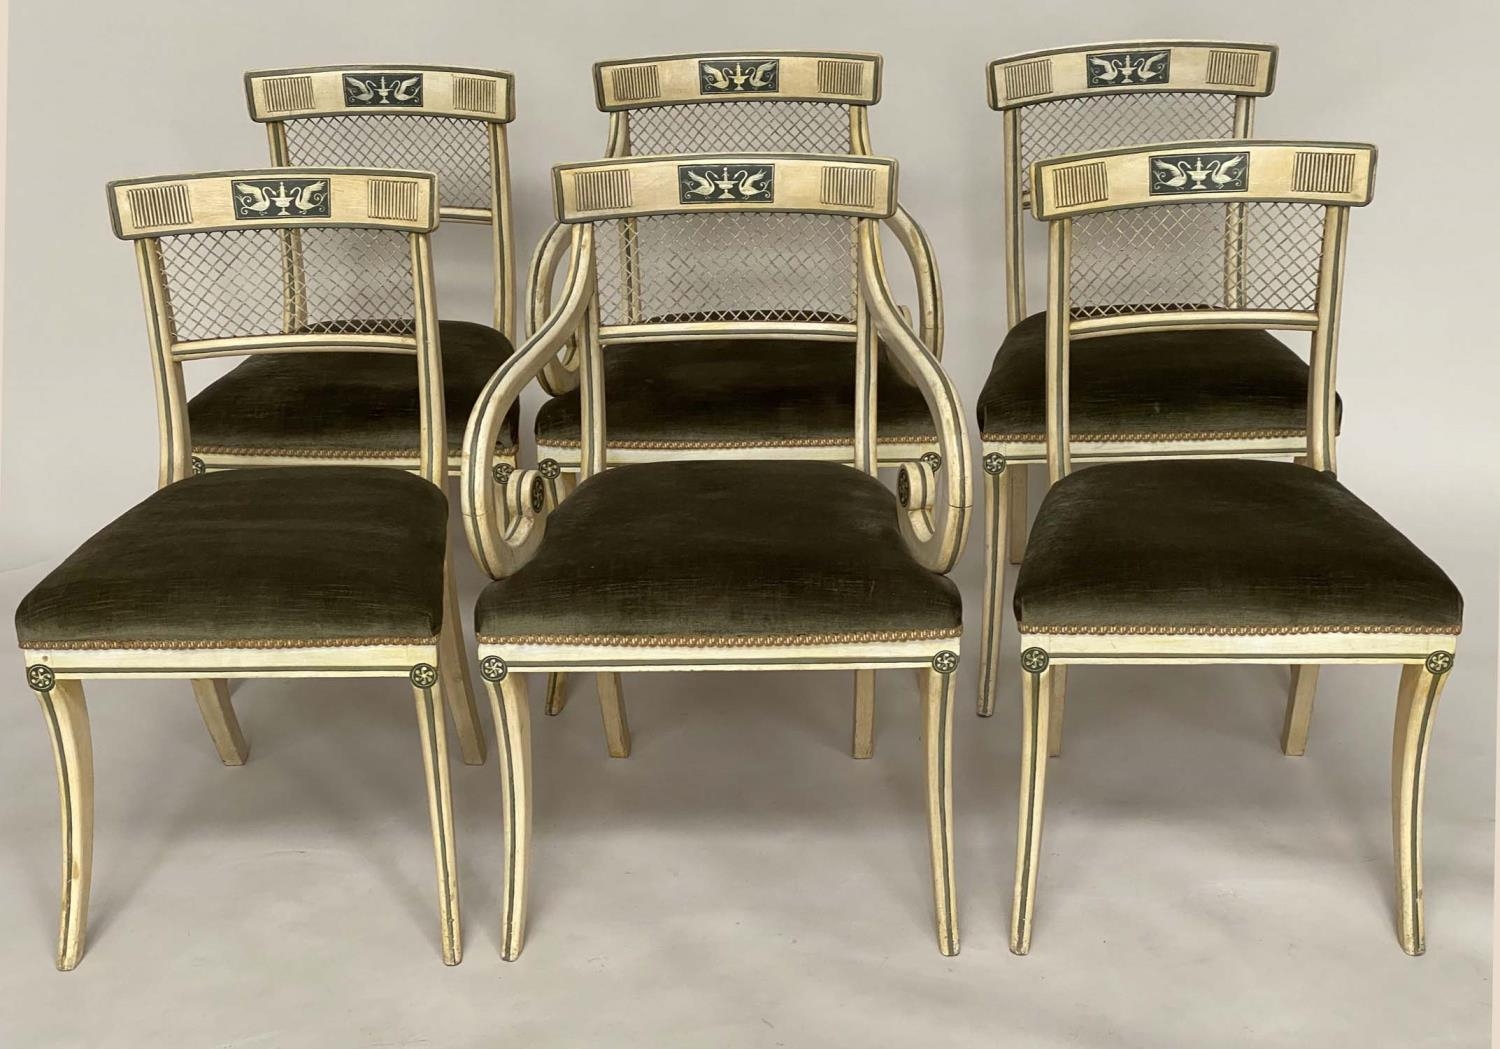 DINING CHAIRS, a set of six, Regency style painted with arch bowed backs and green velvet